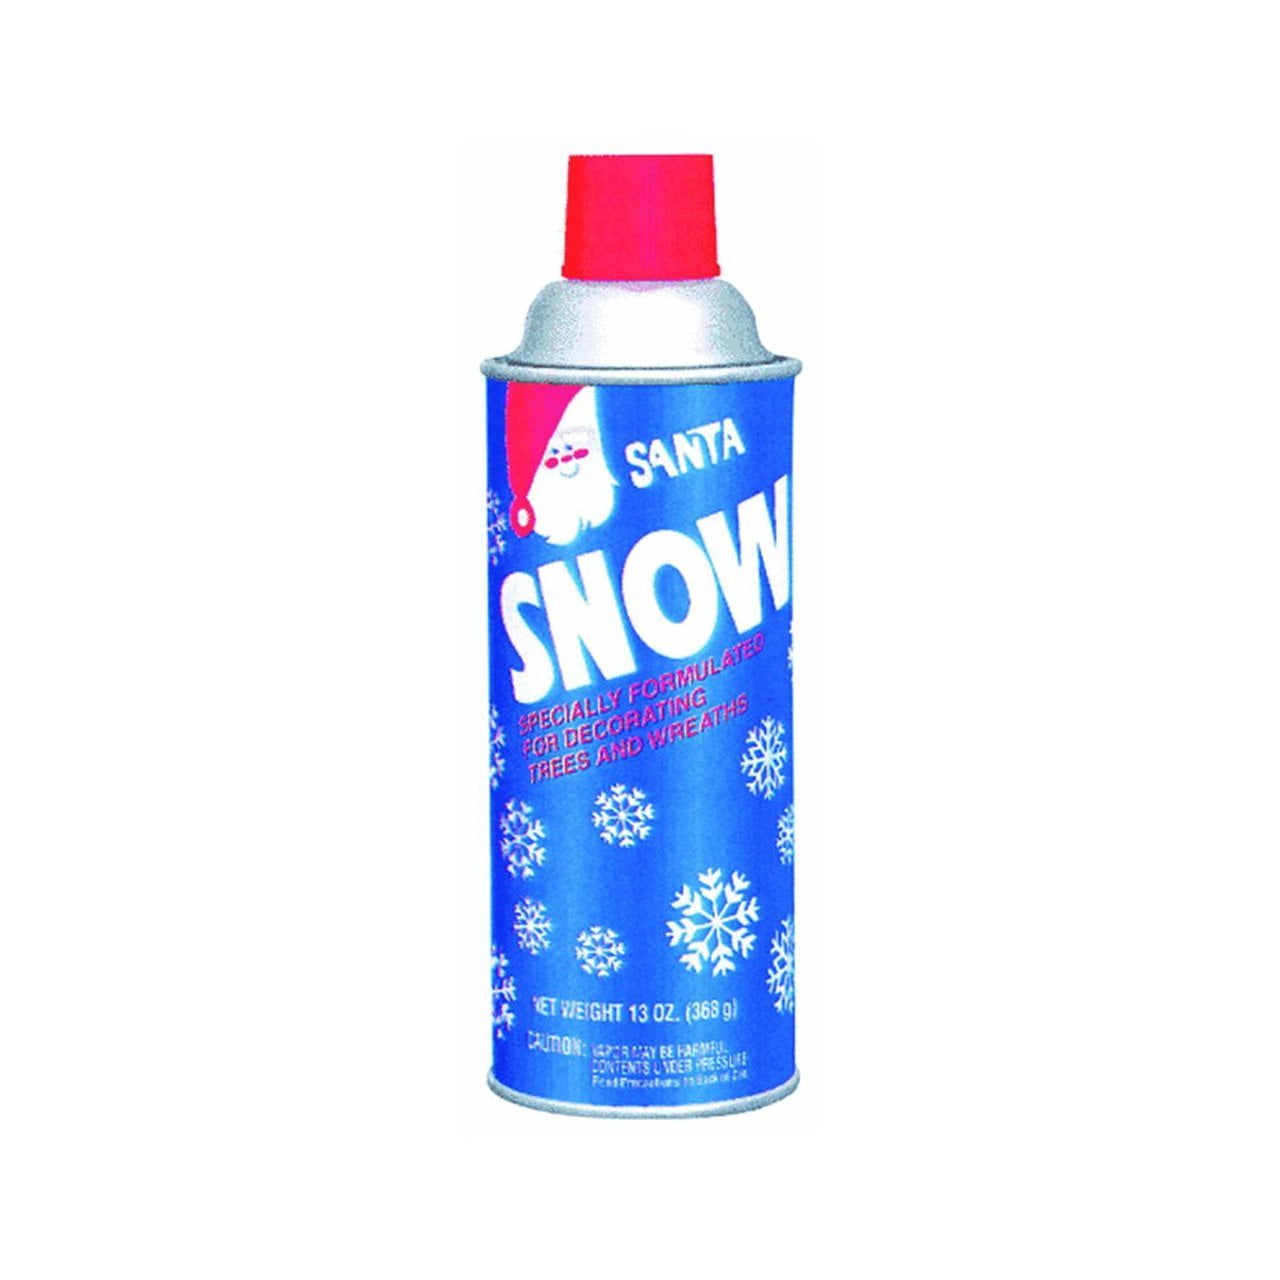 Has anyone tried using this fake snow spray for terrain? How'd it